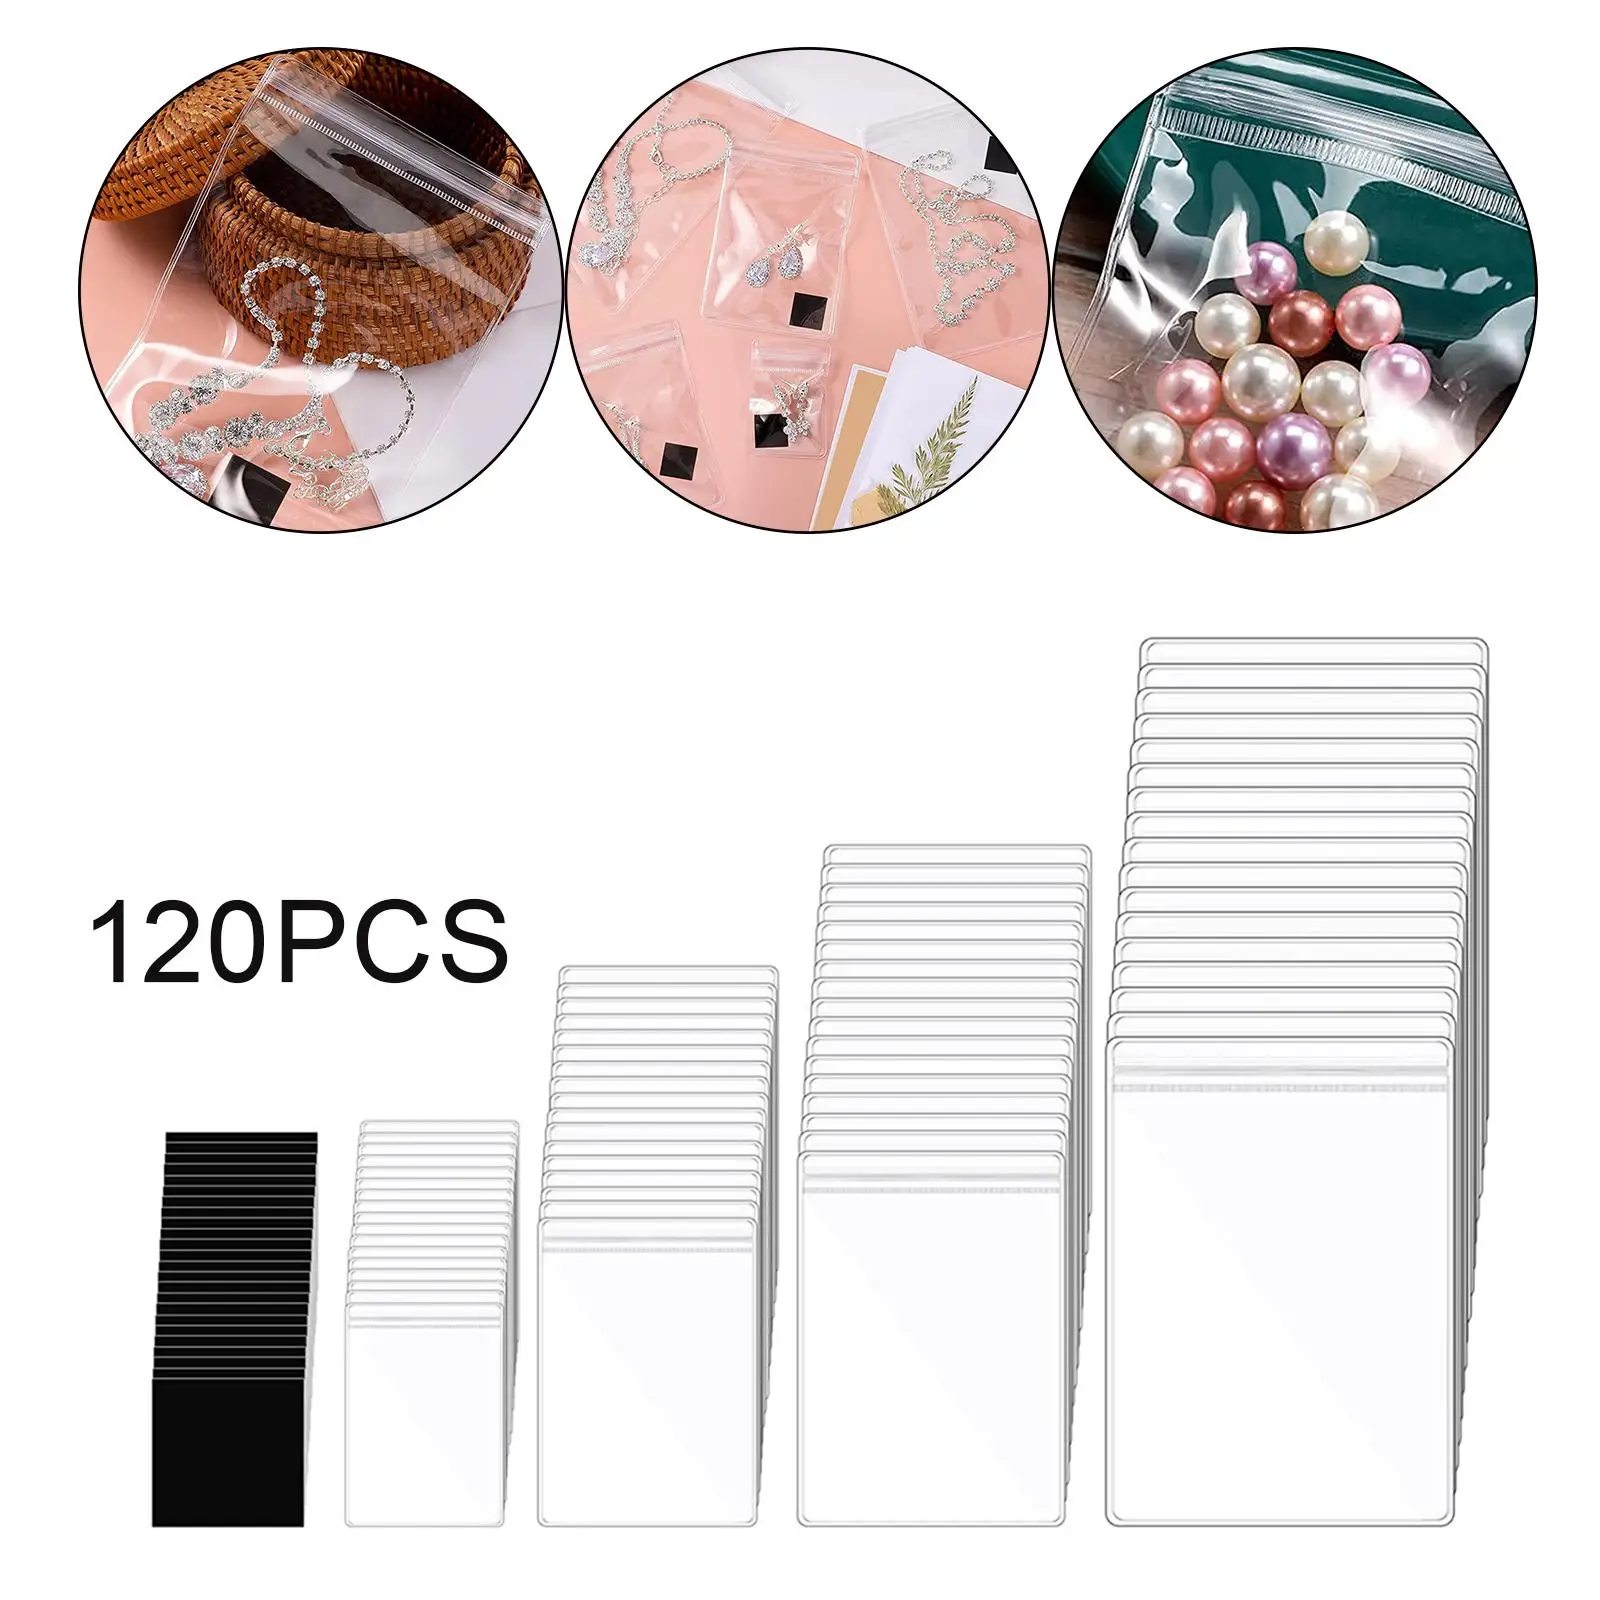 Storage Seal Bags with Antioxidation Sheets Clear Resealable PVC for Jewelry